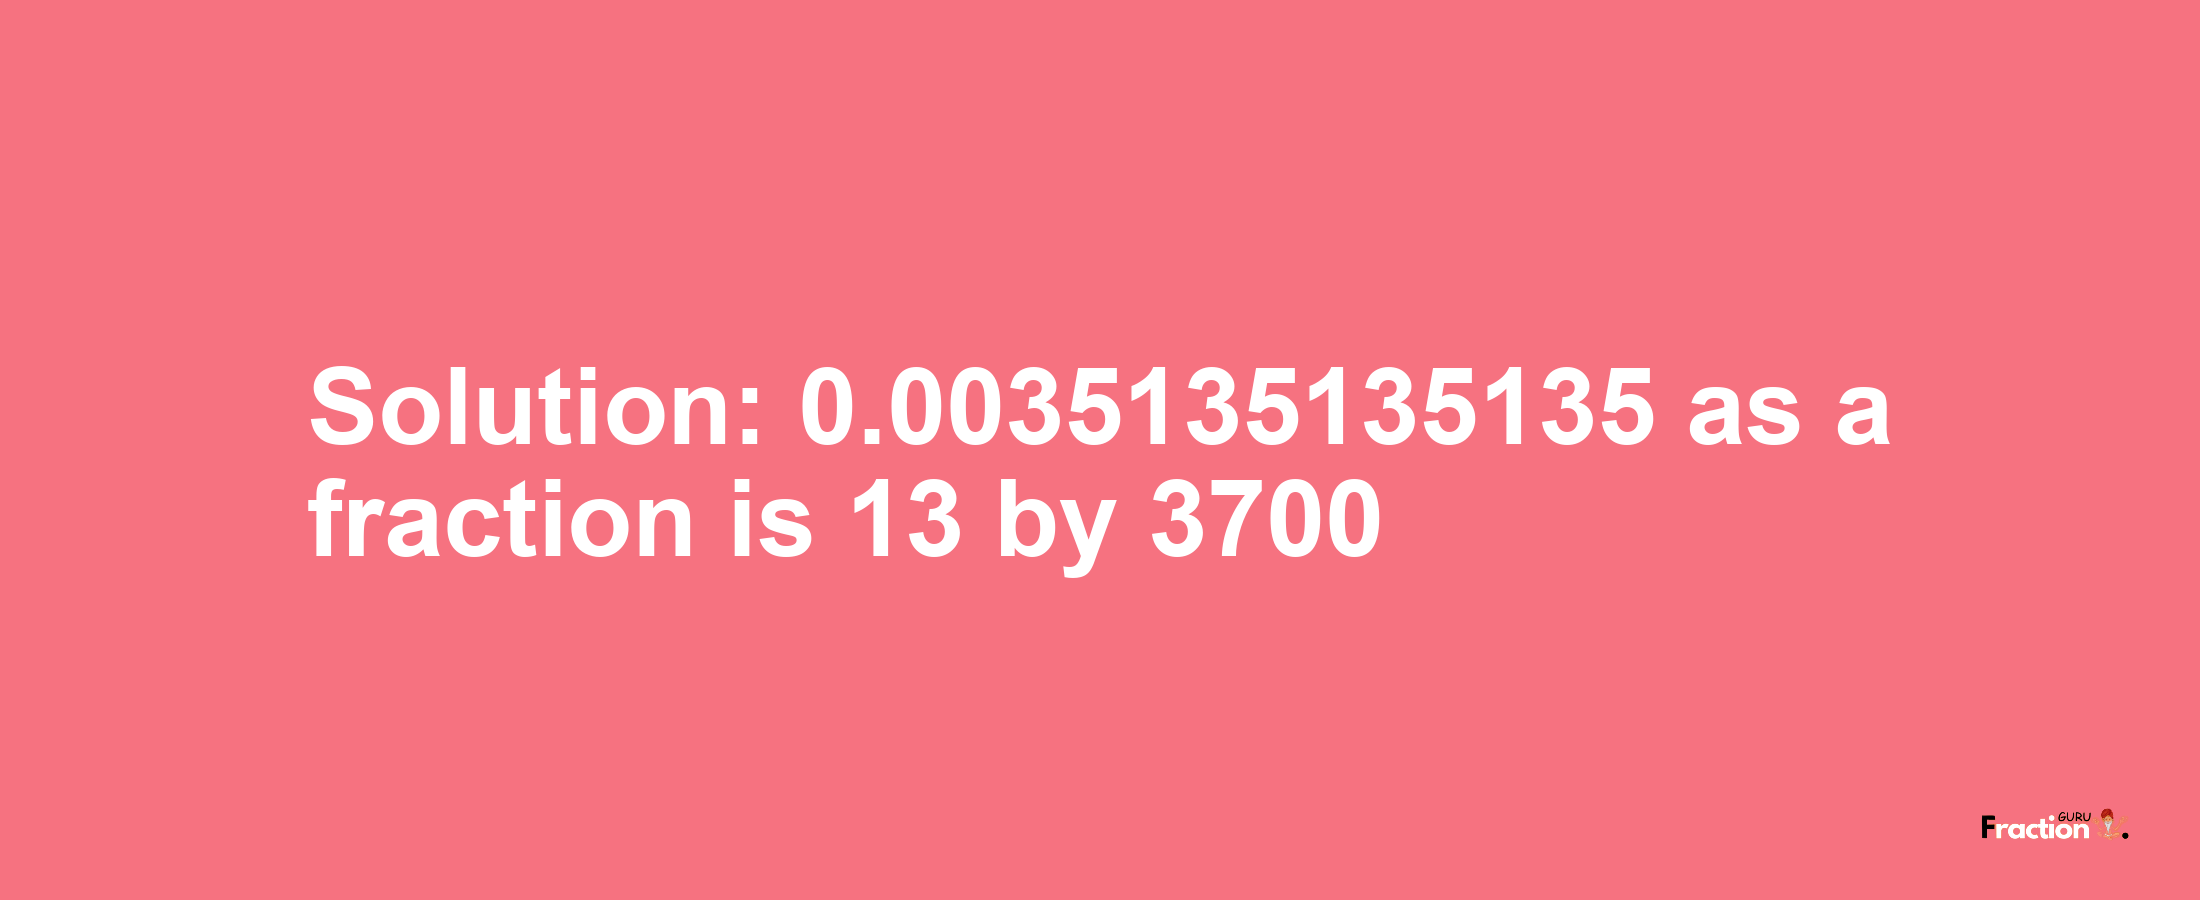 Solution:0.0035135135135 as a fraction is 13/3700